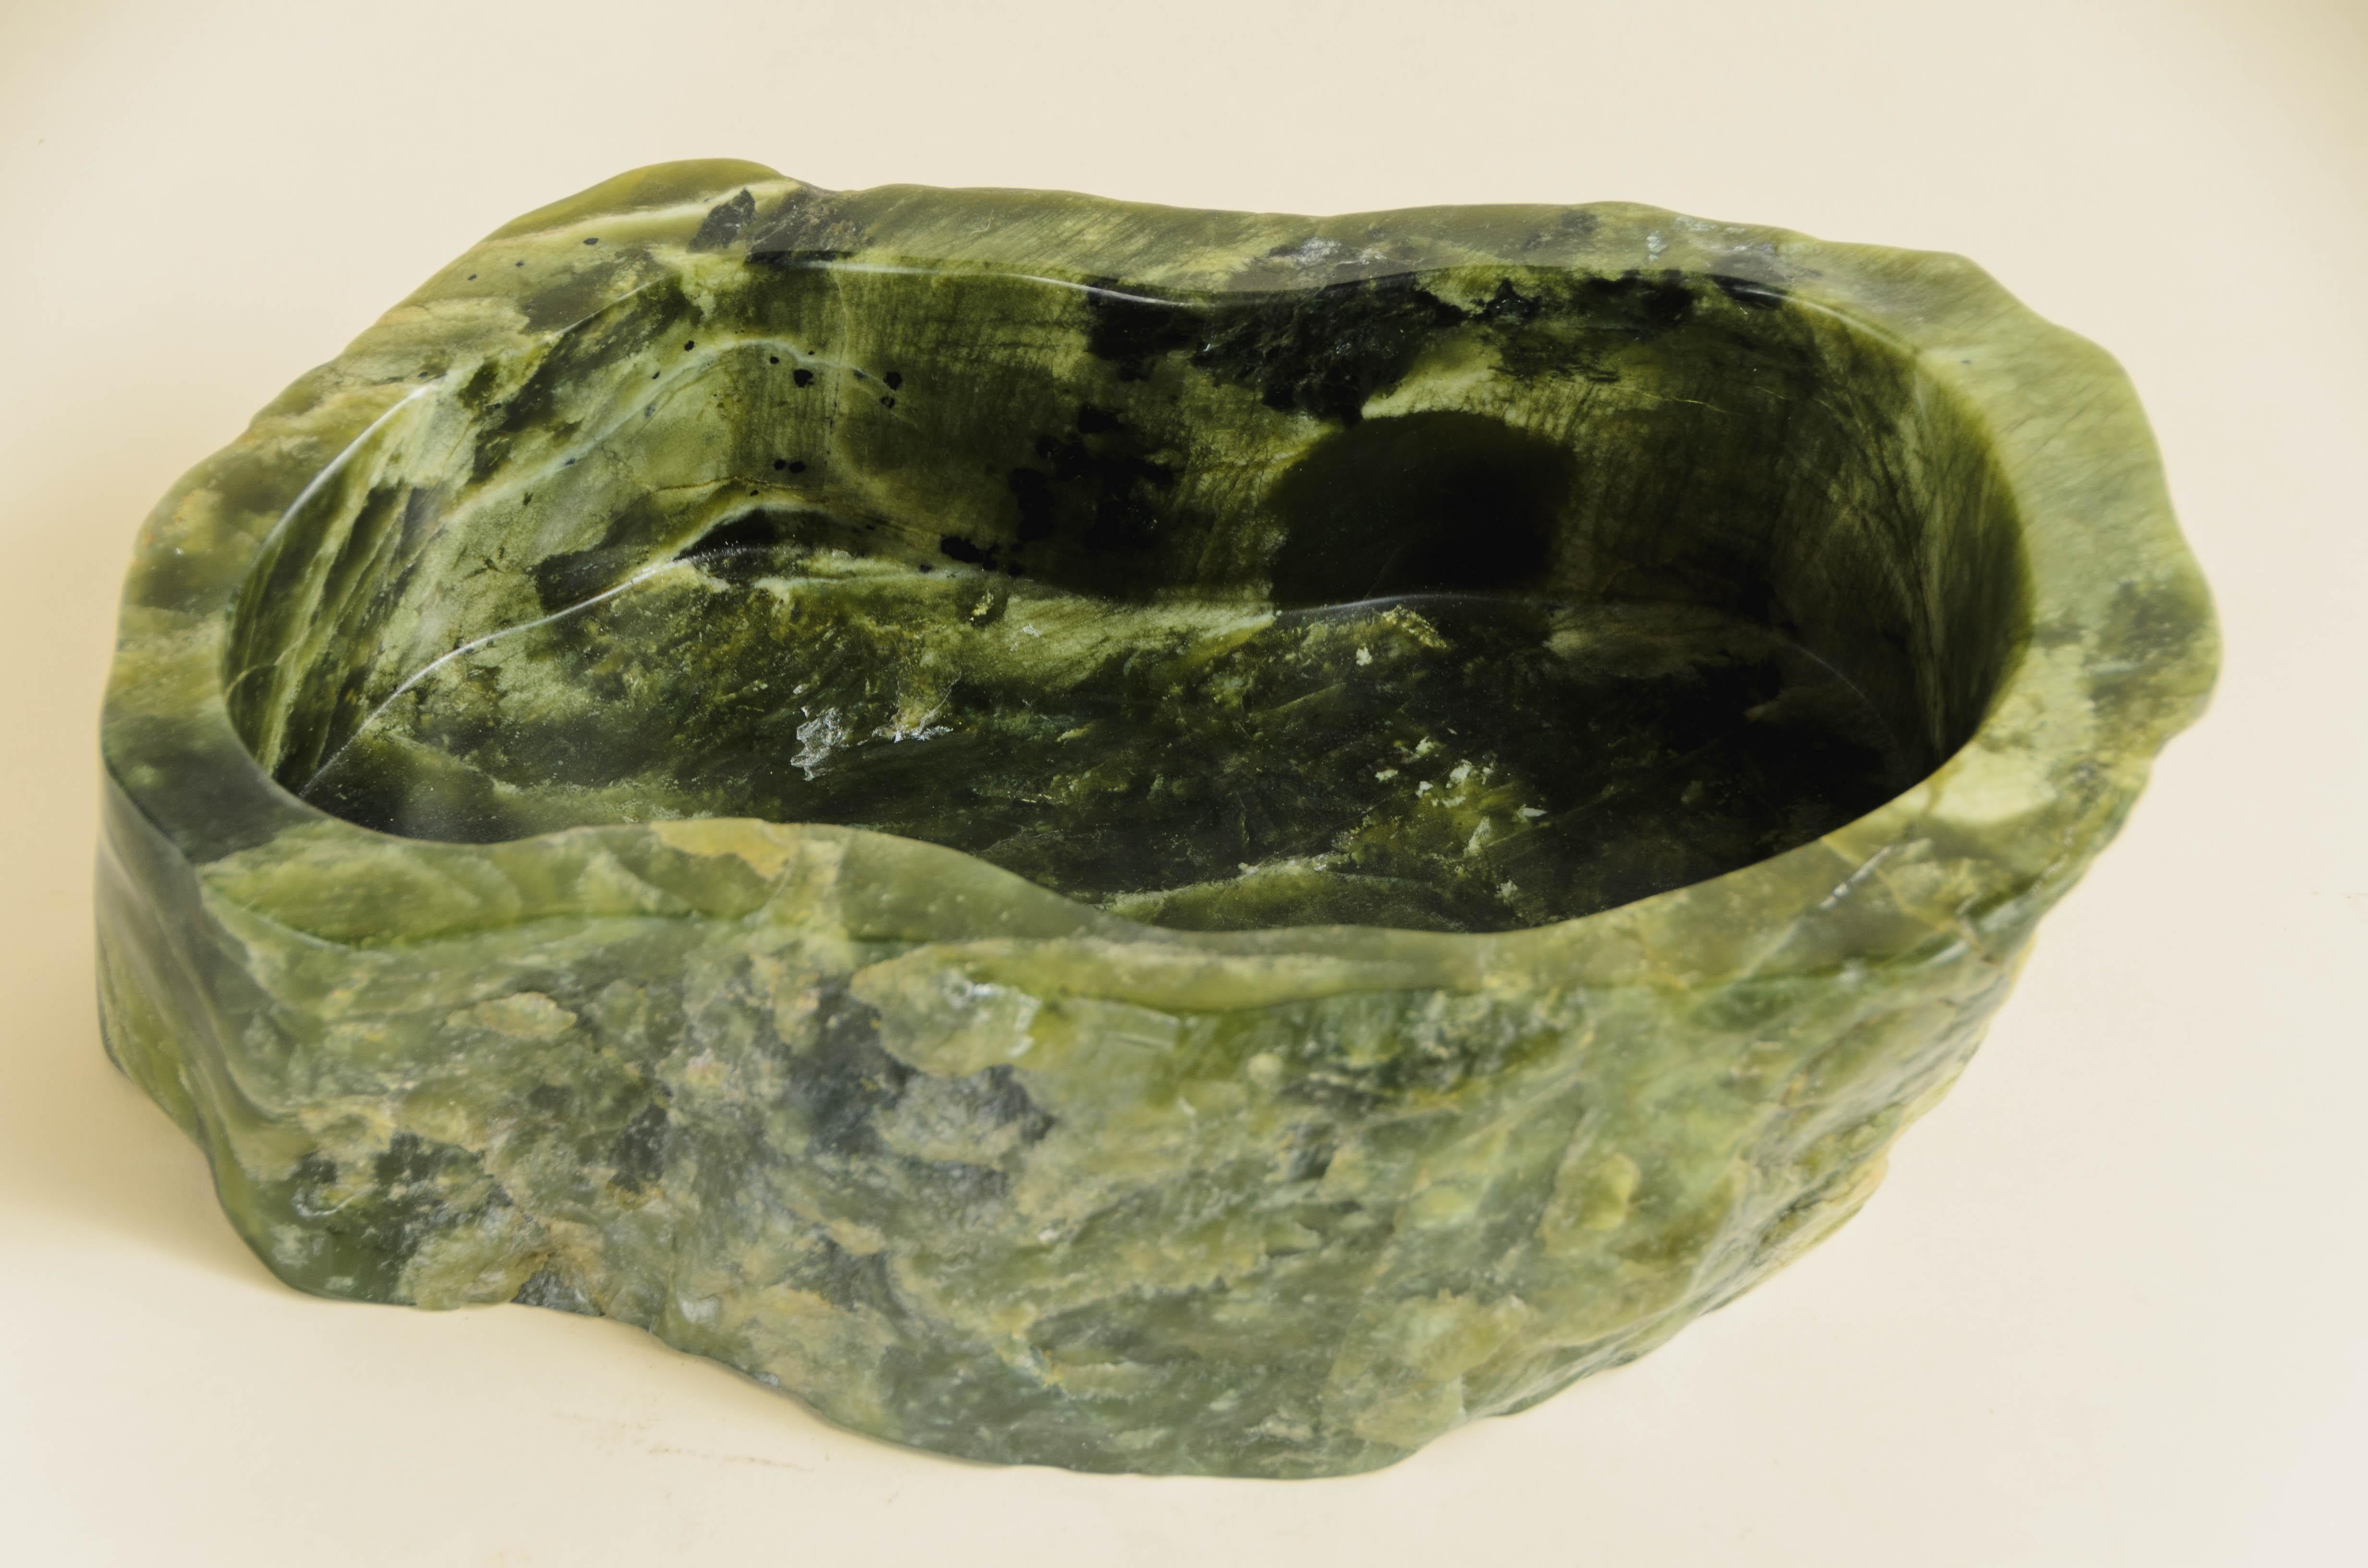 Oblong Cachepot
Nephrite Jade
Hand Carved
Limited Edition
Contemporary

Please note: Each individual jade vary in shapes and color

Known as the “Stone of Heaven,” Nephrite Jade is prized for both its aesthetic beauty and symbolic value,